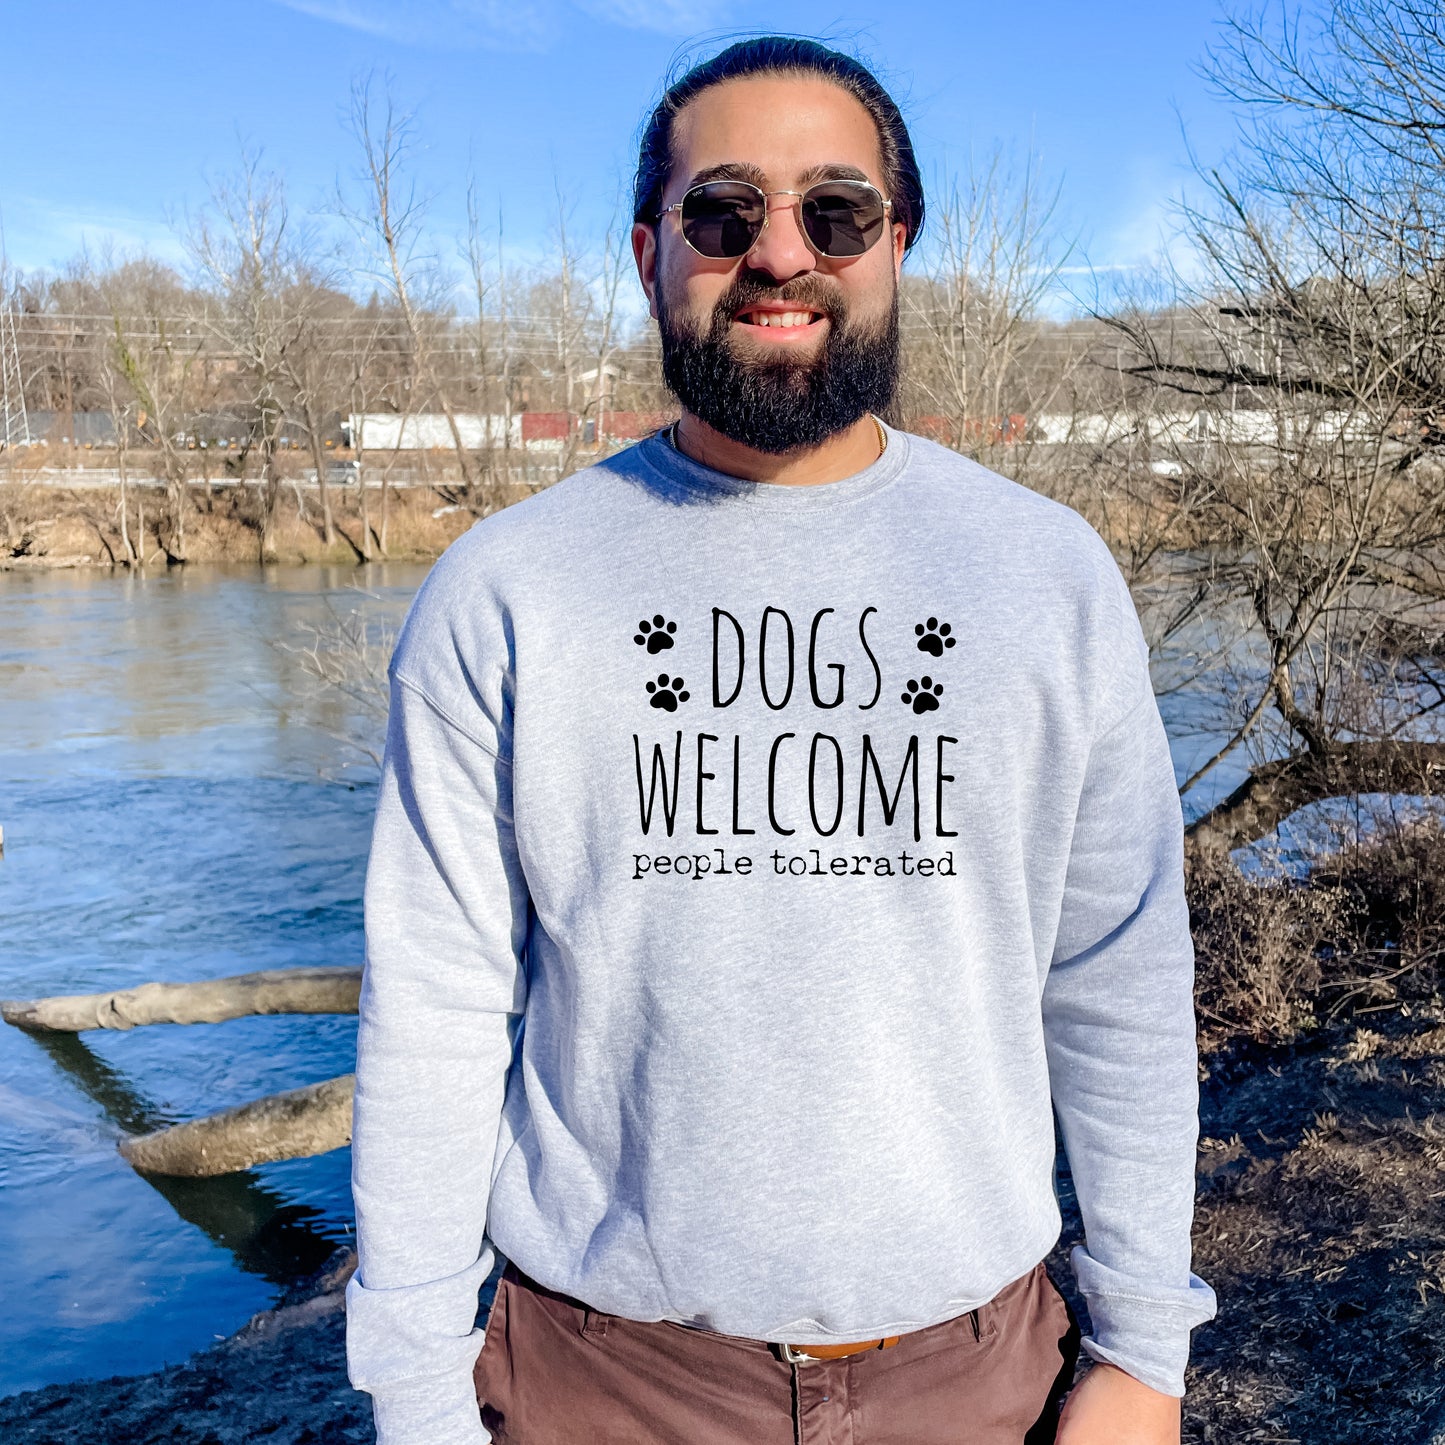 Dogs Welcome, People Tolerated - Unisex Sweatshirt - Heather Gray or Dusty Blue